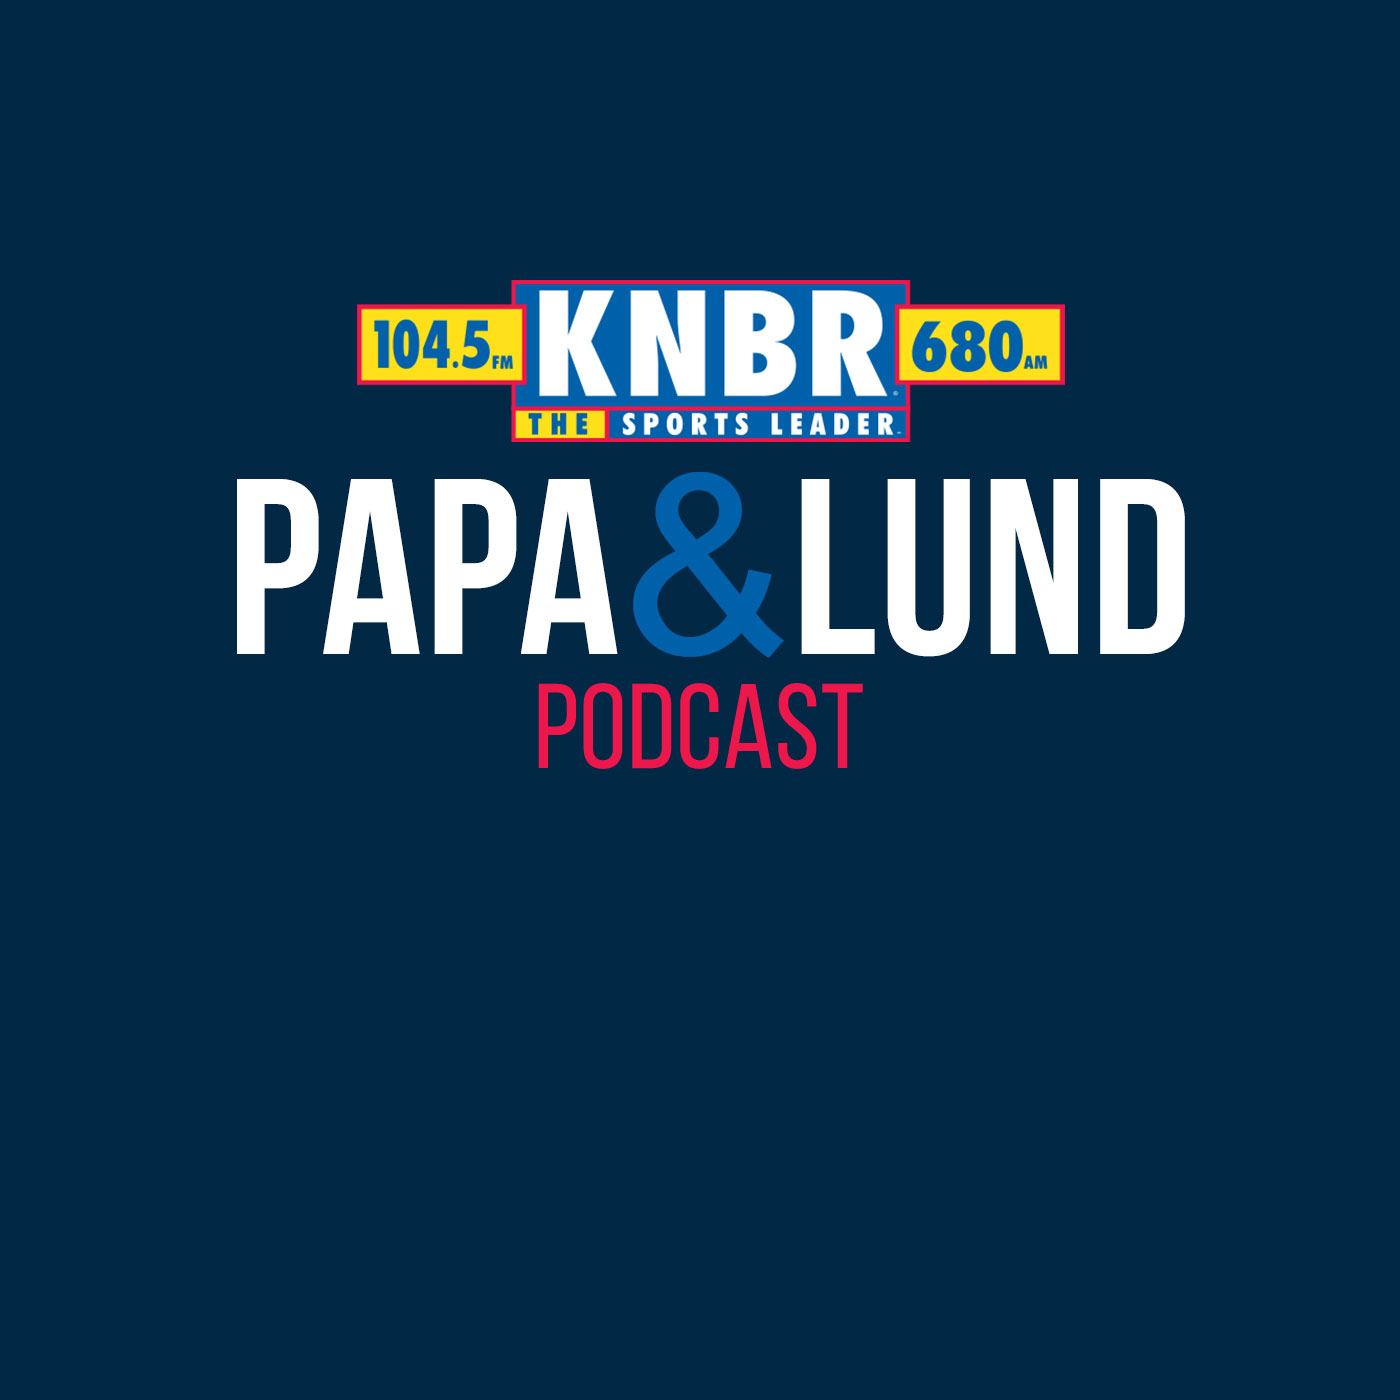 11-20 Mike Jones joins Papa & Lund to recap an important Week 11 and how the playoff picture shifted after the dust settled